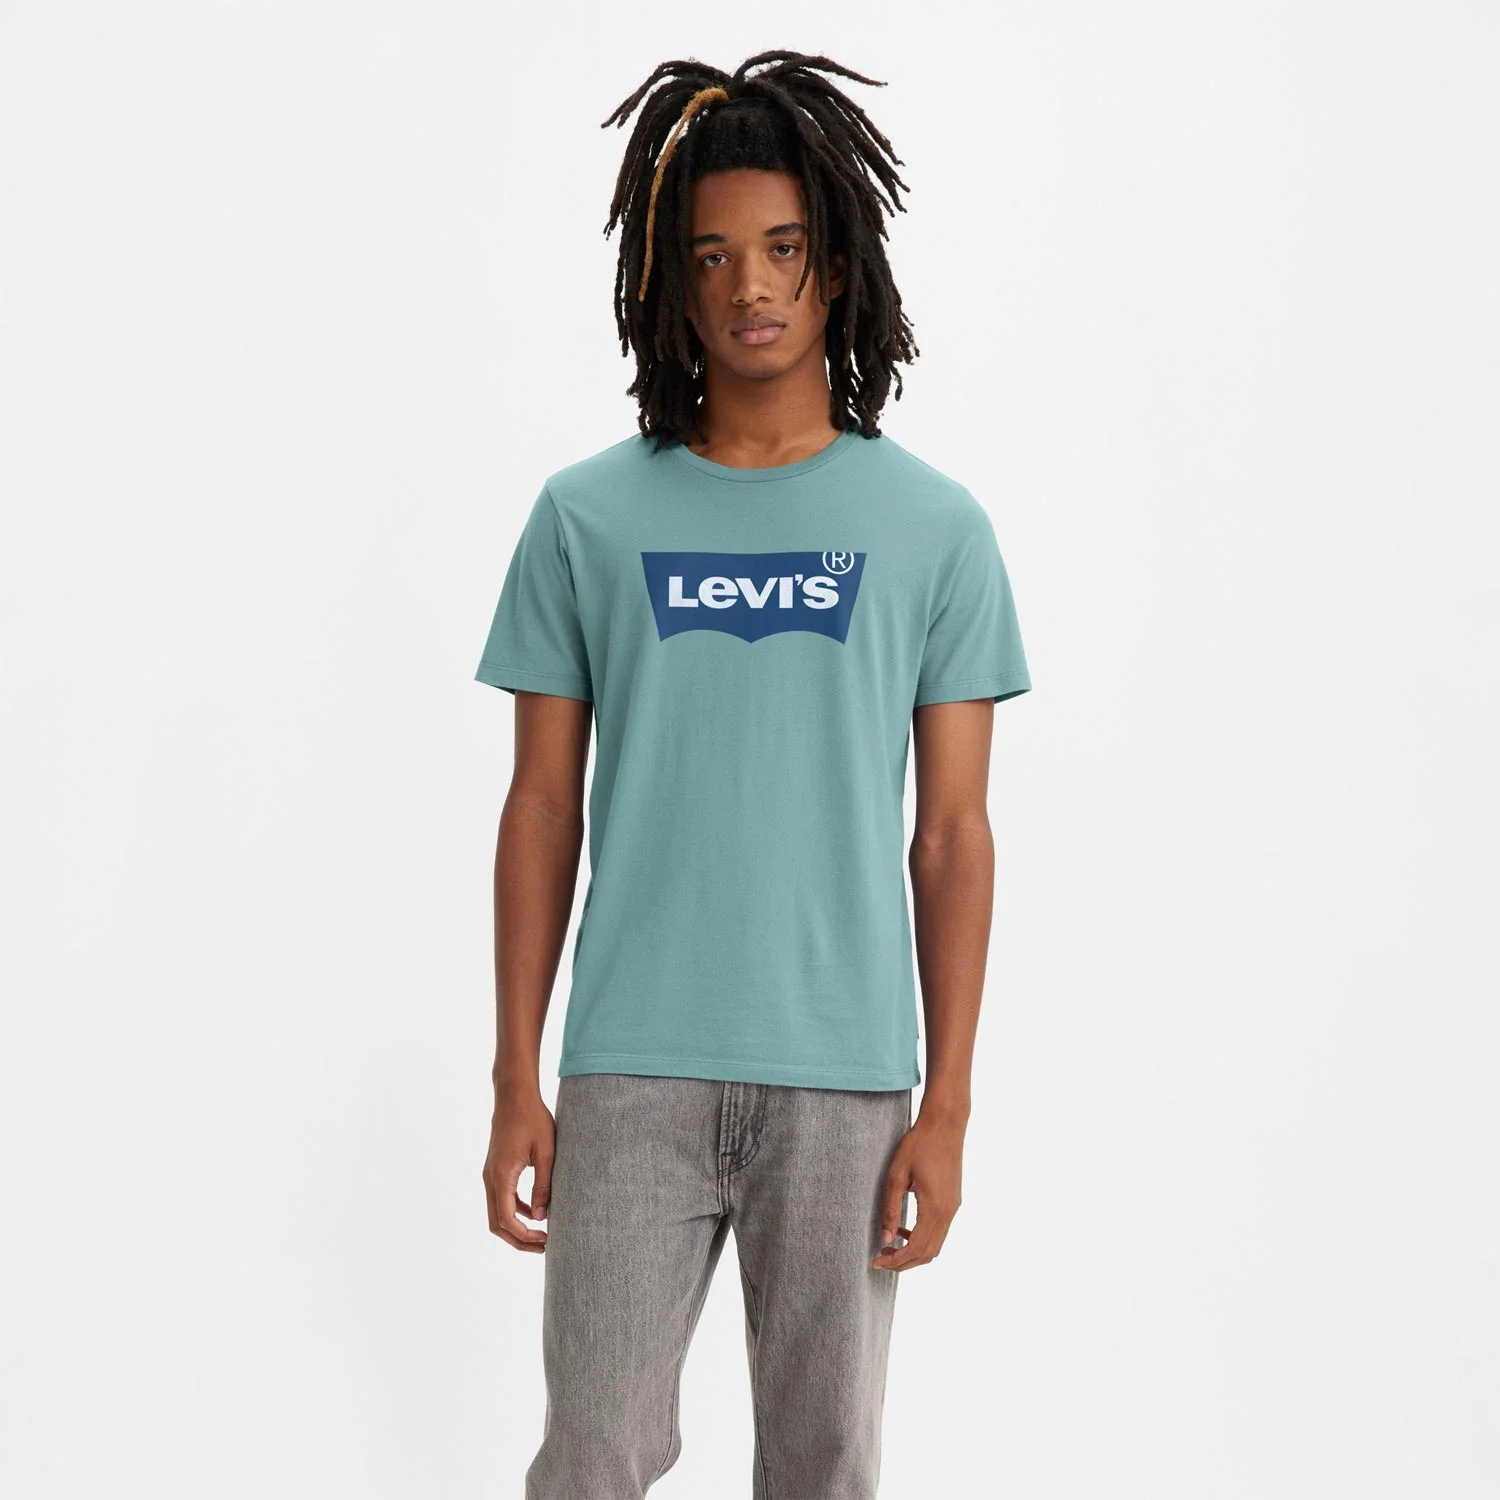 Levis Graphic Crewneck Regular Fit Short Sleeve Tee - Color Extension/Pastel Turquoise